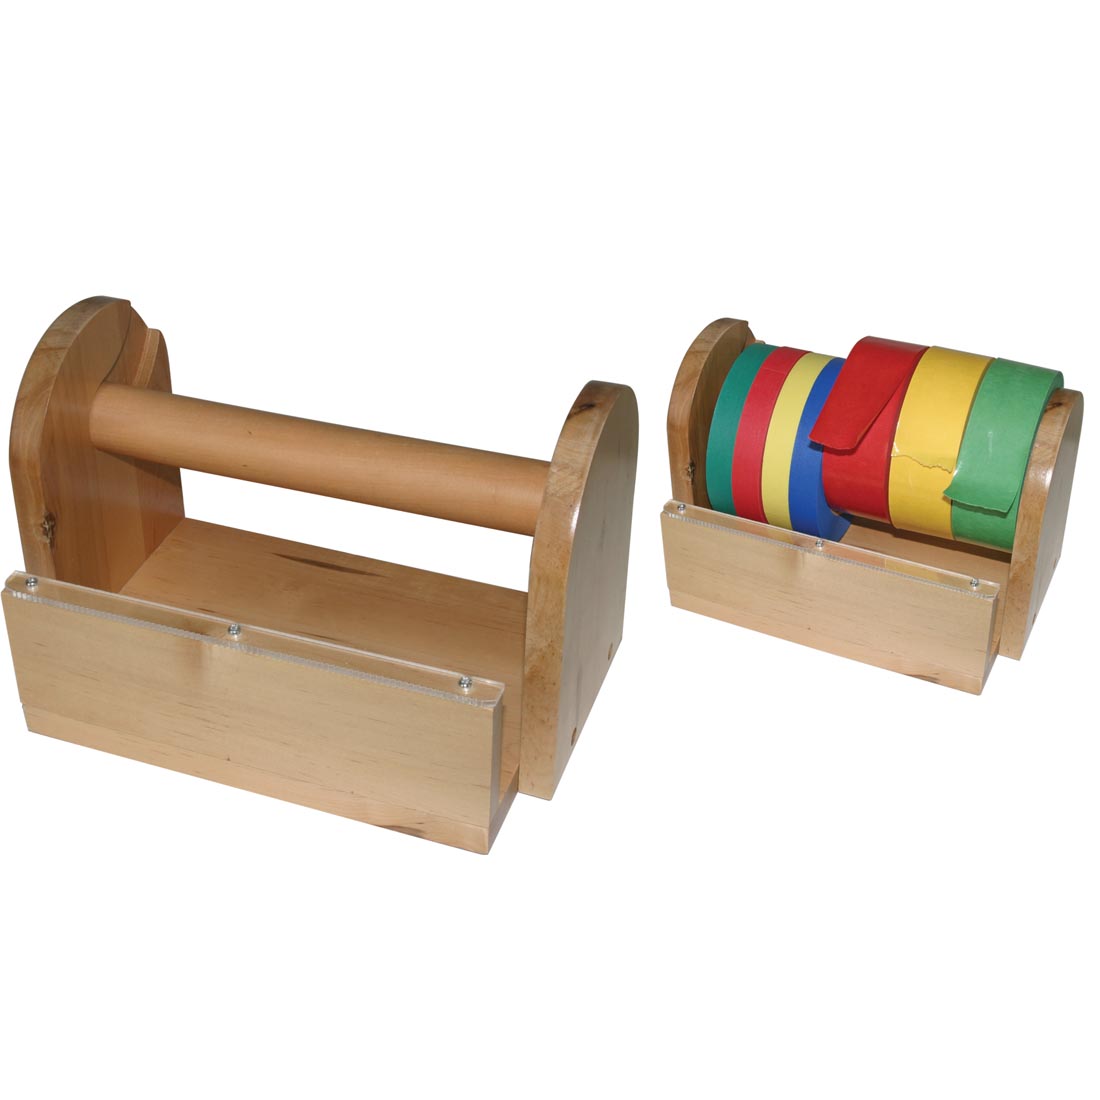 Creativity Street wooden tape stand, shown empty and with colored tapes